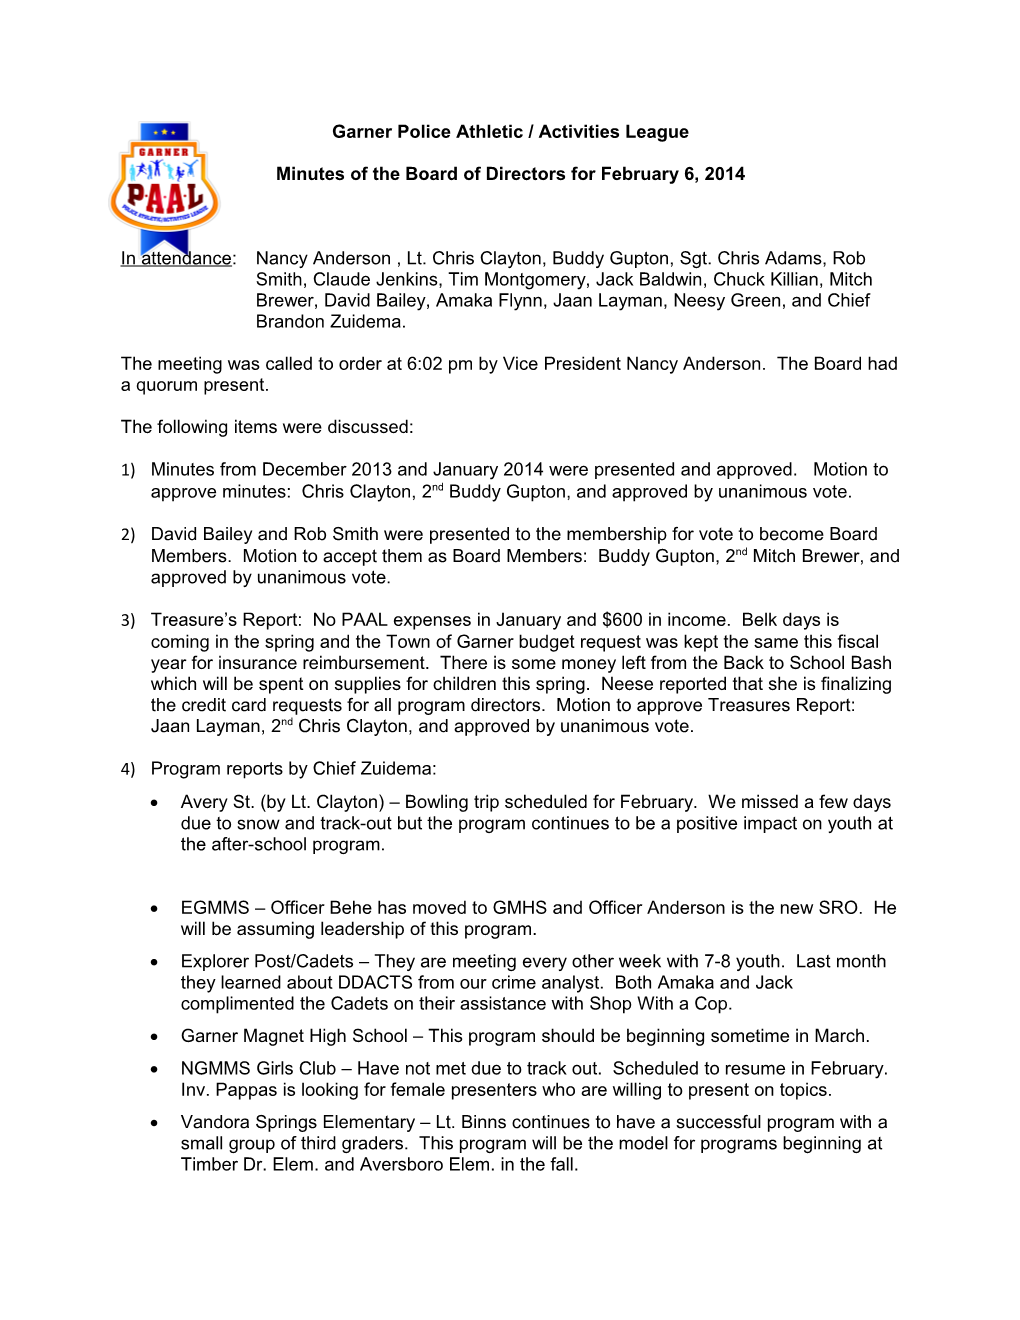 Minutes of the Board of Directors for February 6, 2014